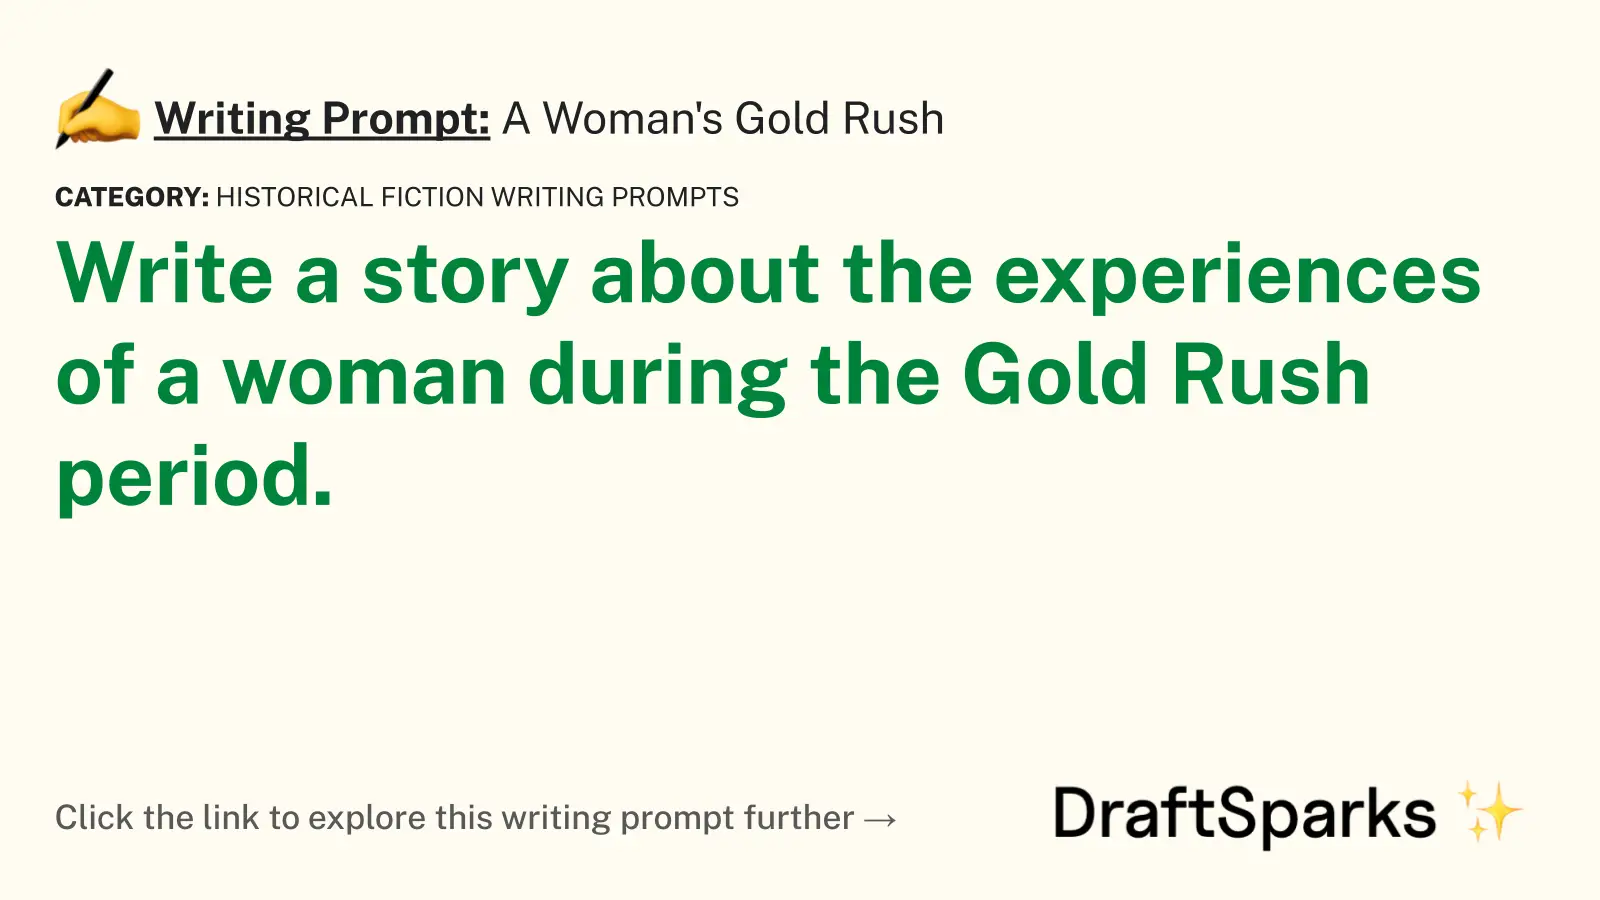 A Woman’s Gold Rush